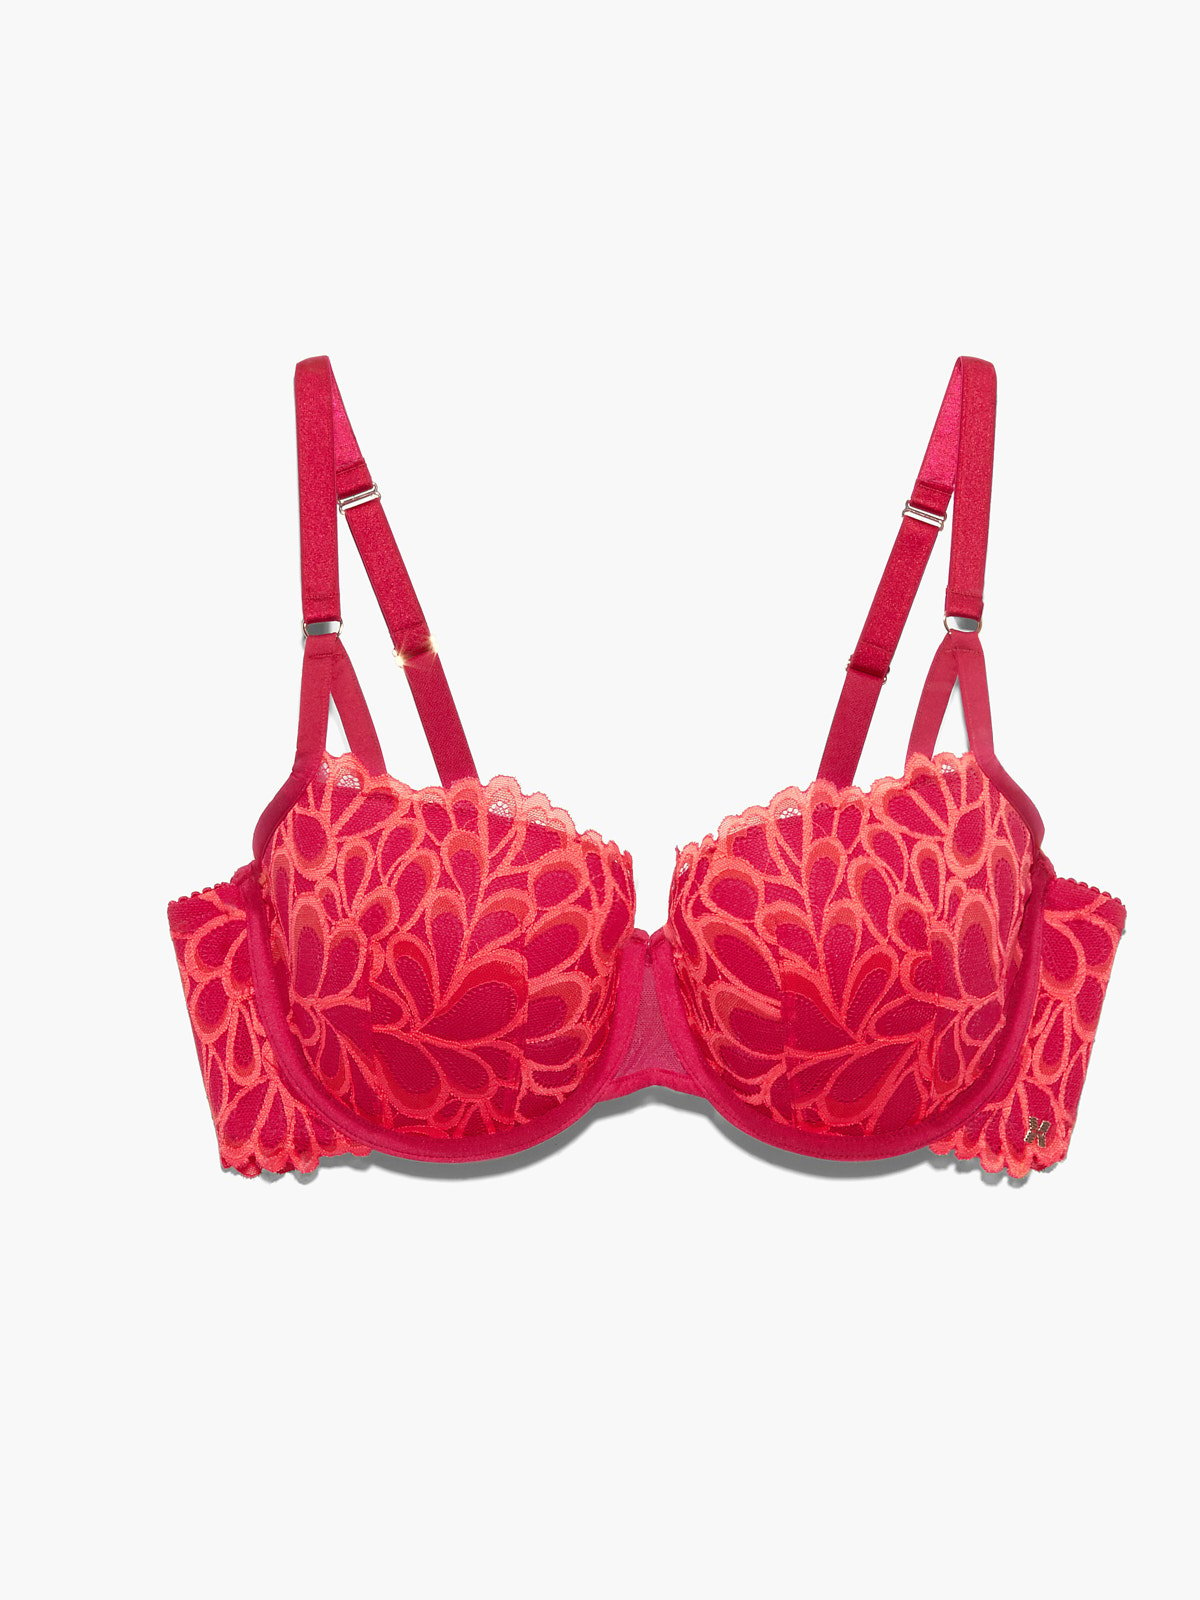  Womens Balconette Bra Plus Size Full Coverage Tshirt  Seamless Underwire Bras Back Smoothing Red Revelry 44DD